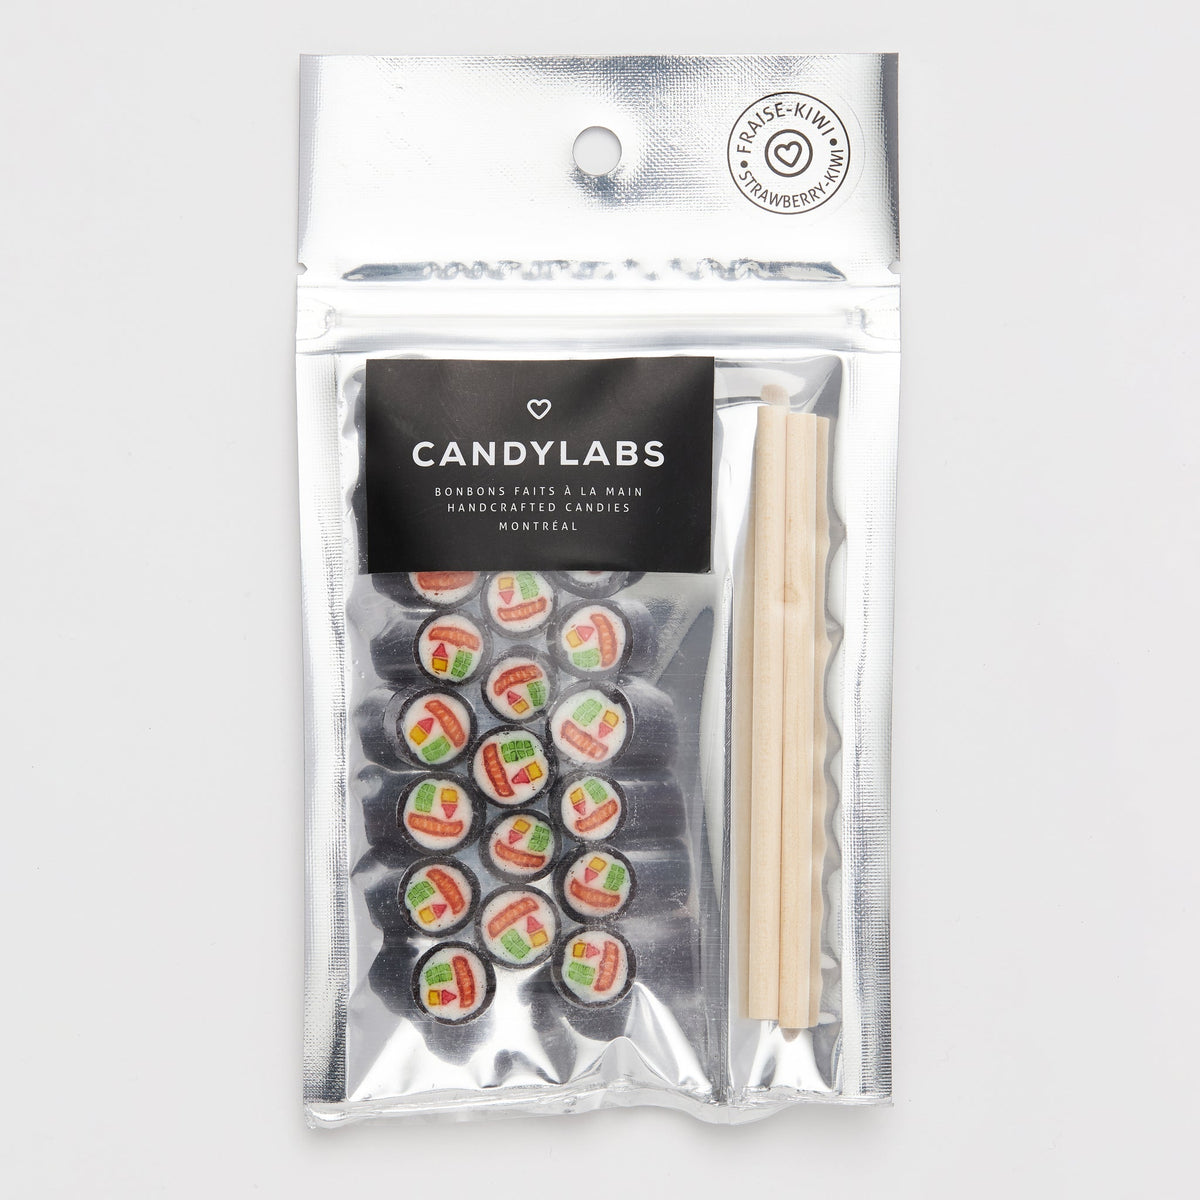 Sushi Kit Candies - Strawberry and kiwi flavor